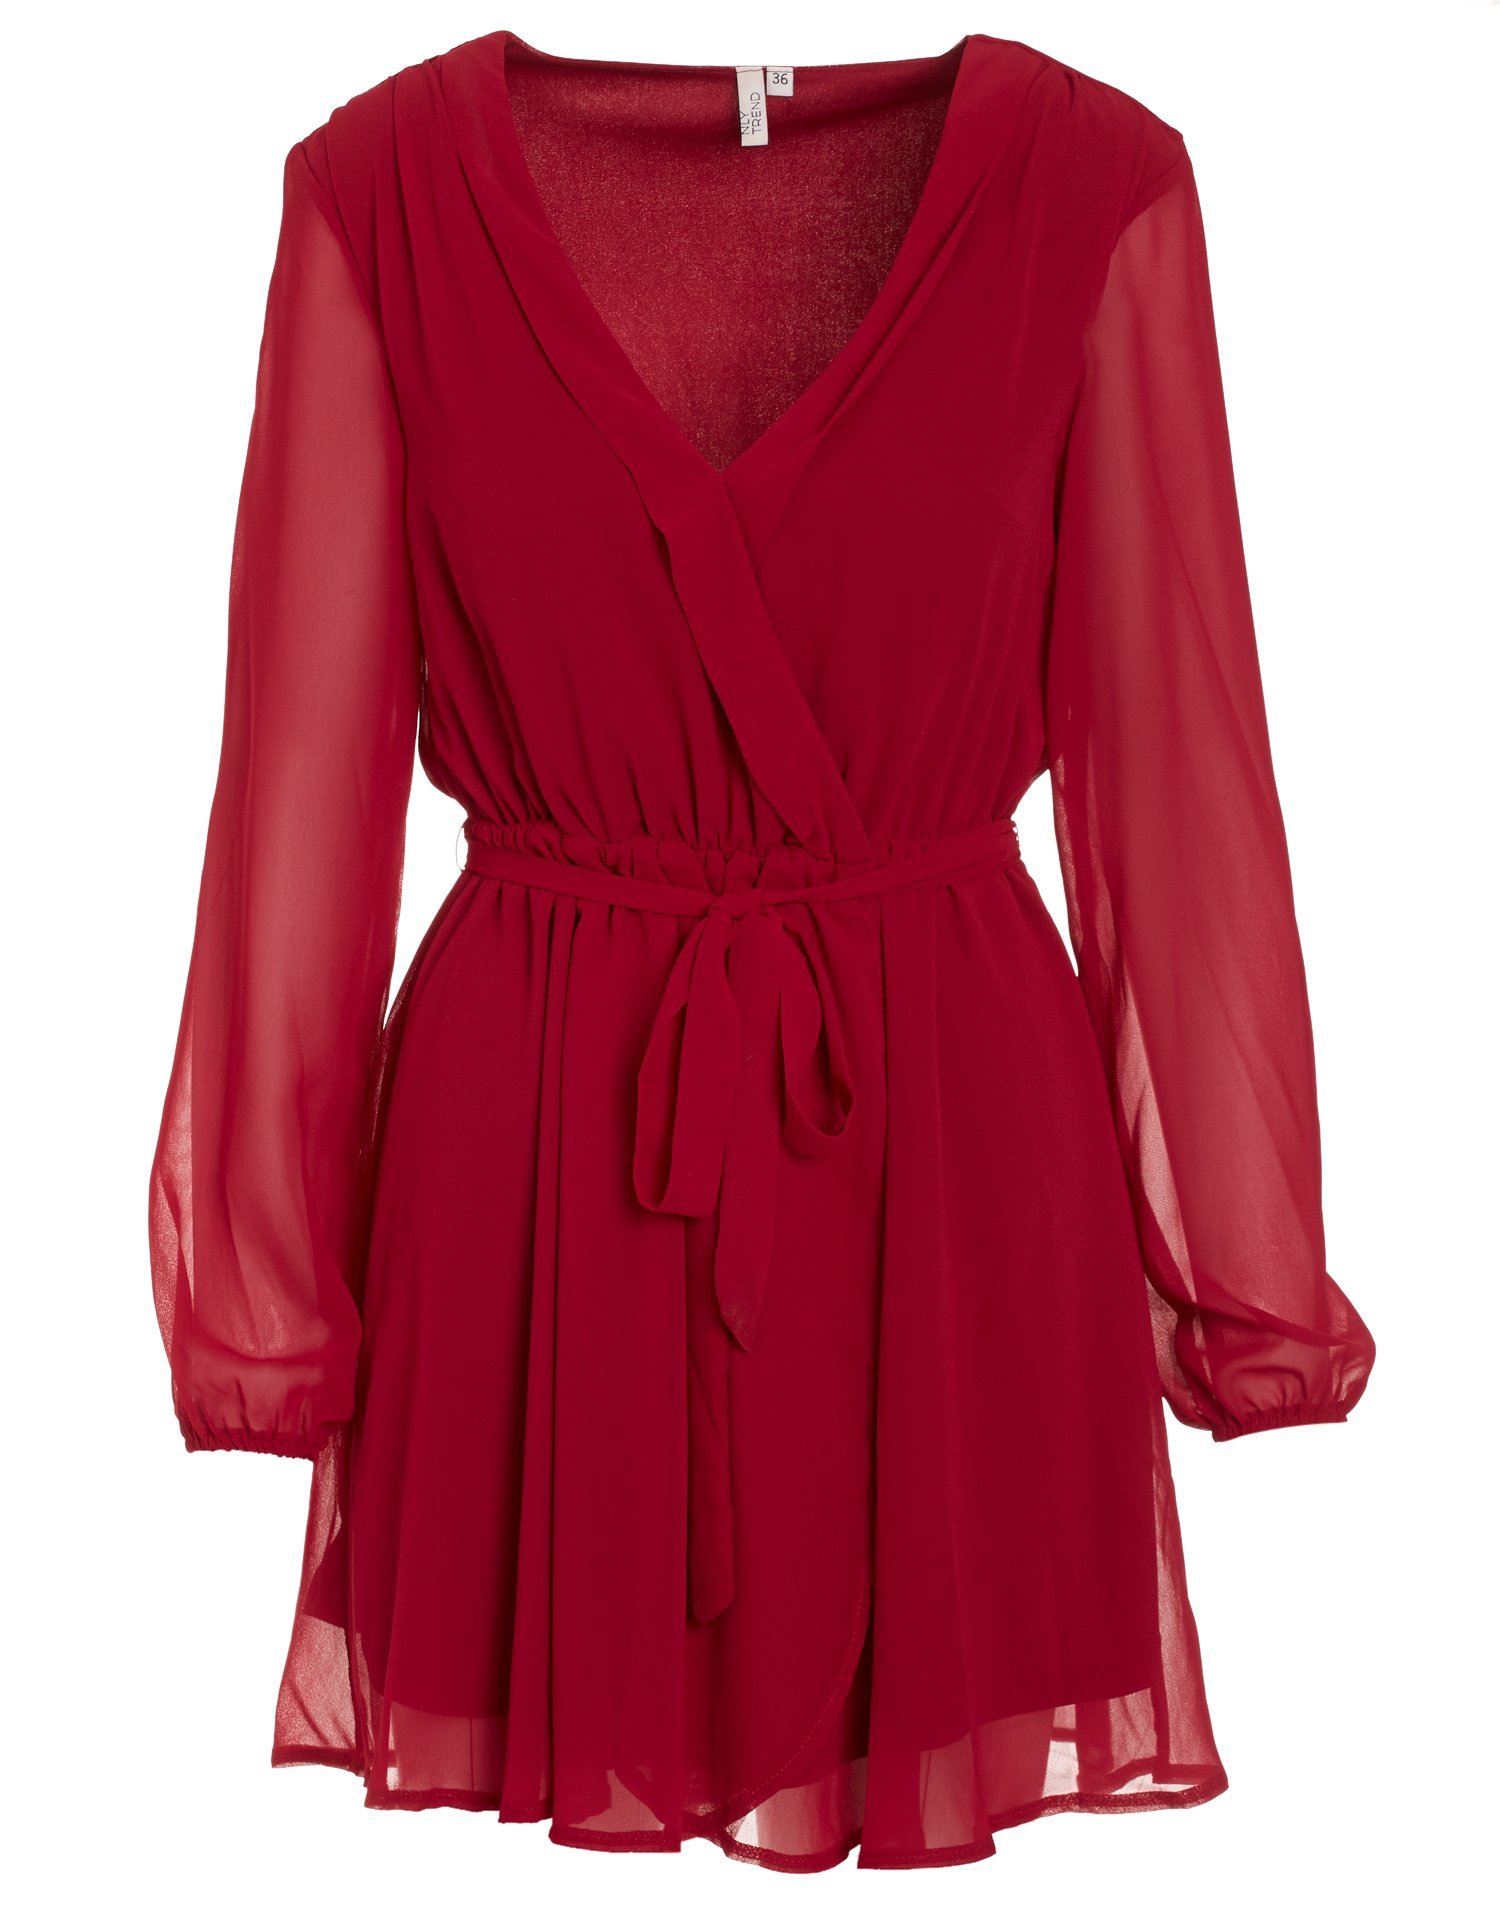 Wrapped Dress - Nly Trend - Burgundy - Party Dresses - Clothing - Women ...